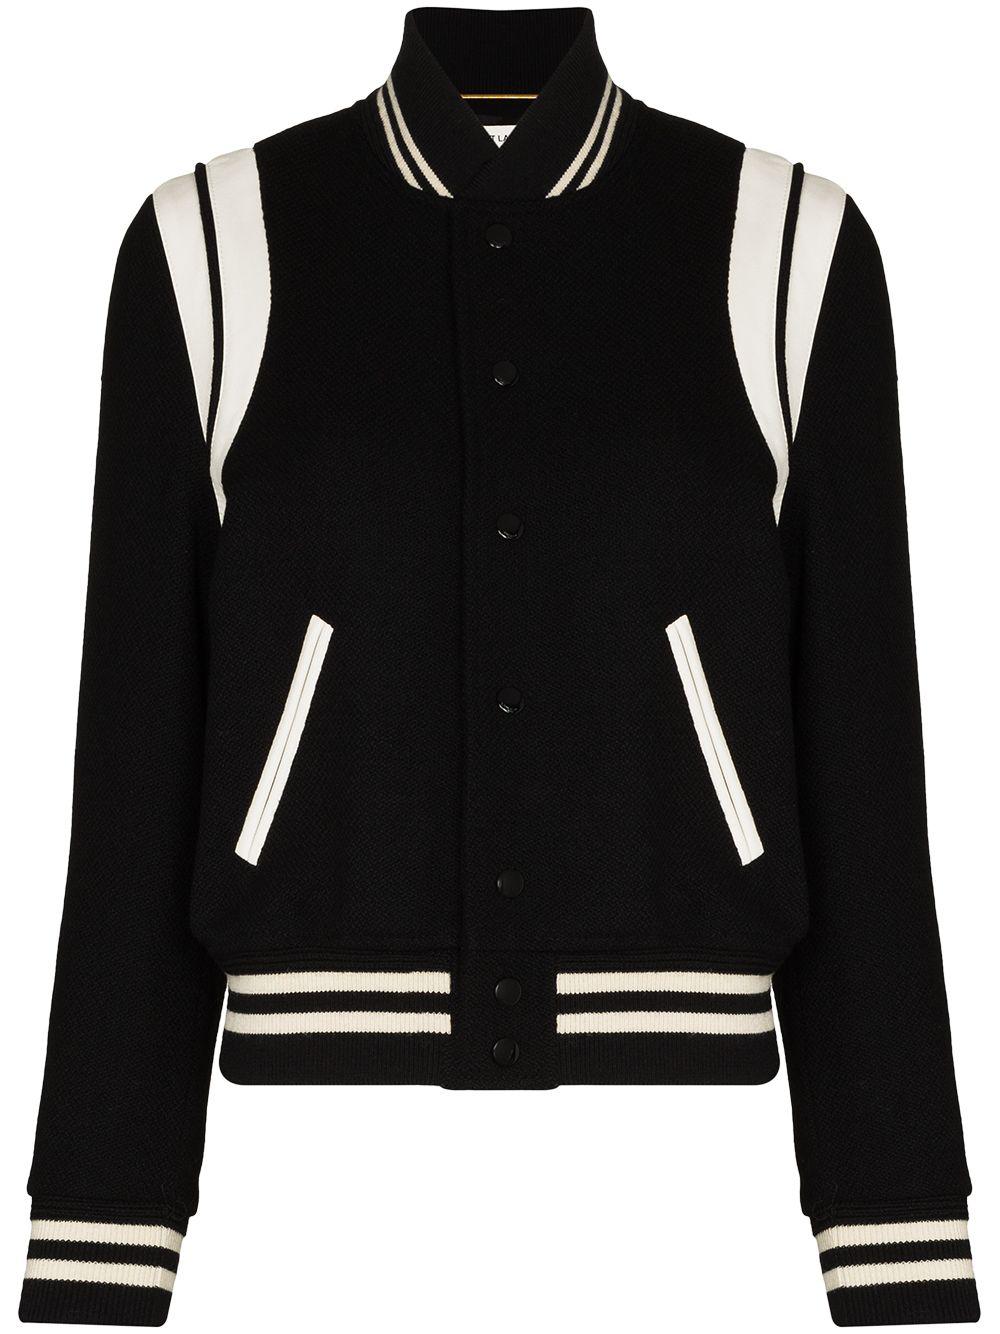 Fashion  The Varsity Jacket Has Become An Essential For Street Stylers The Varsity  Jacket Has Become An Essential For Street Stylers